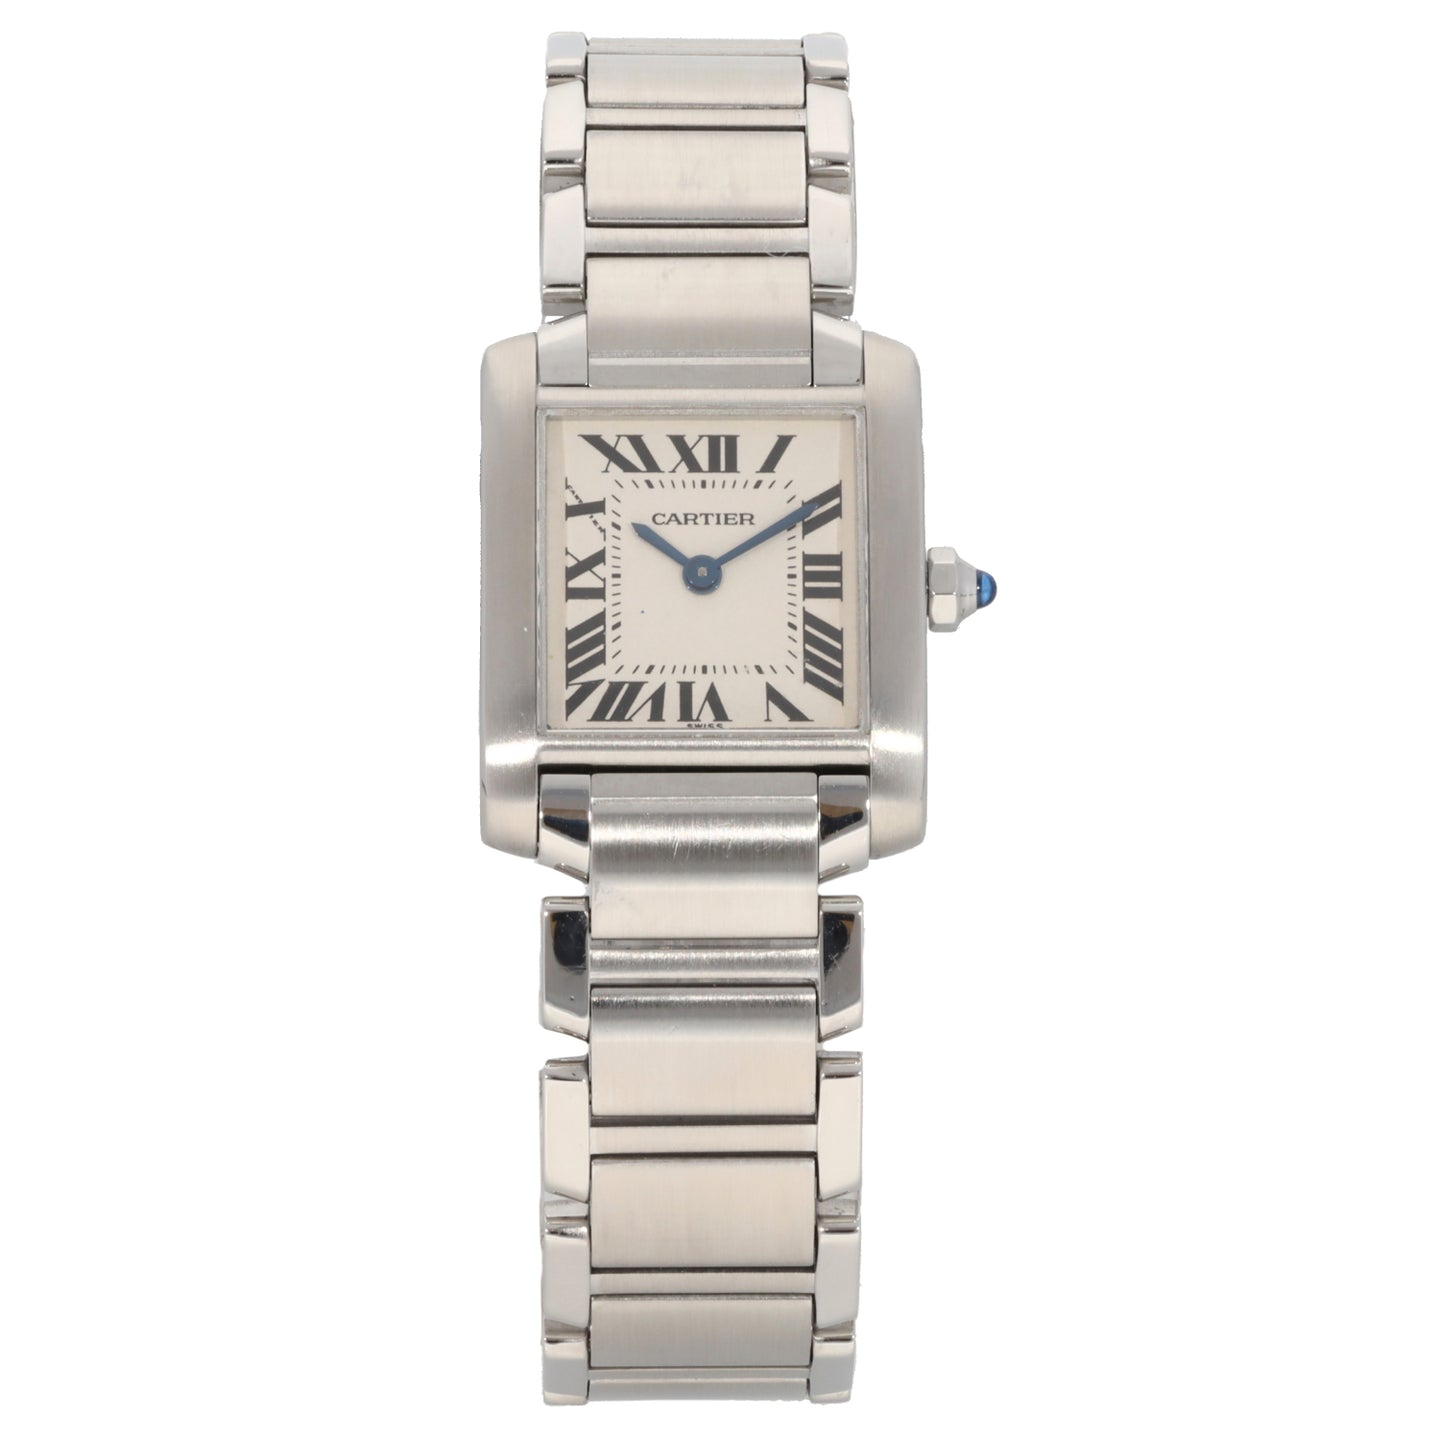 Cartier Tank Francaise W51008Q3 20mm Stainless Steel Watch